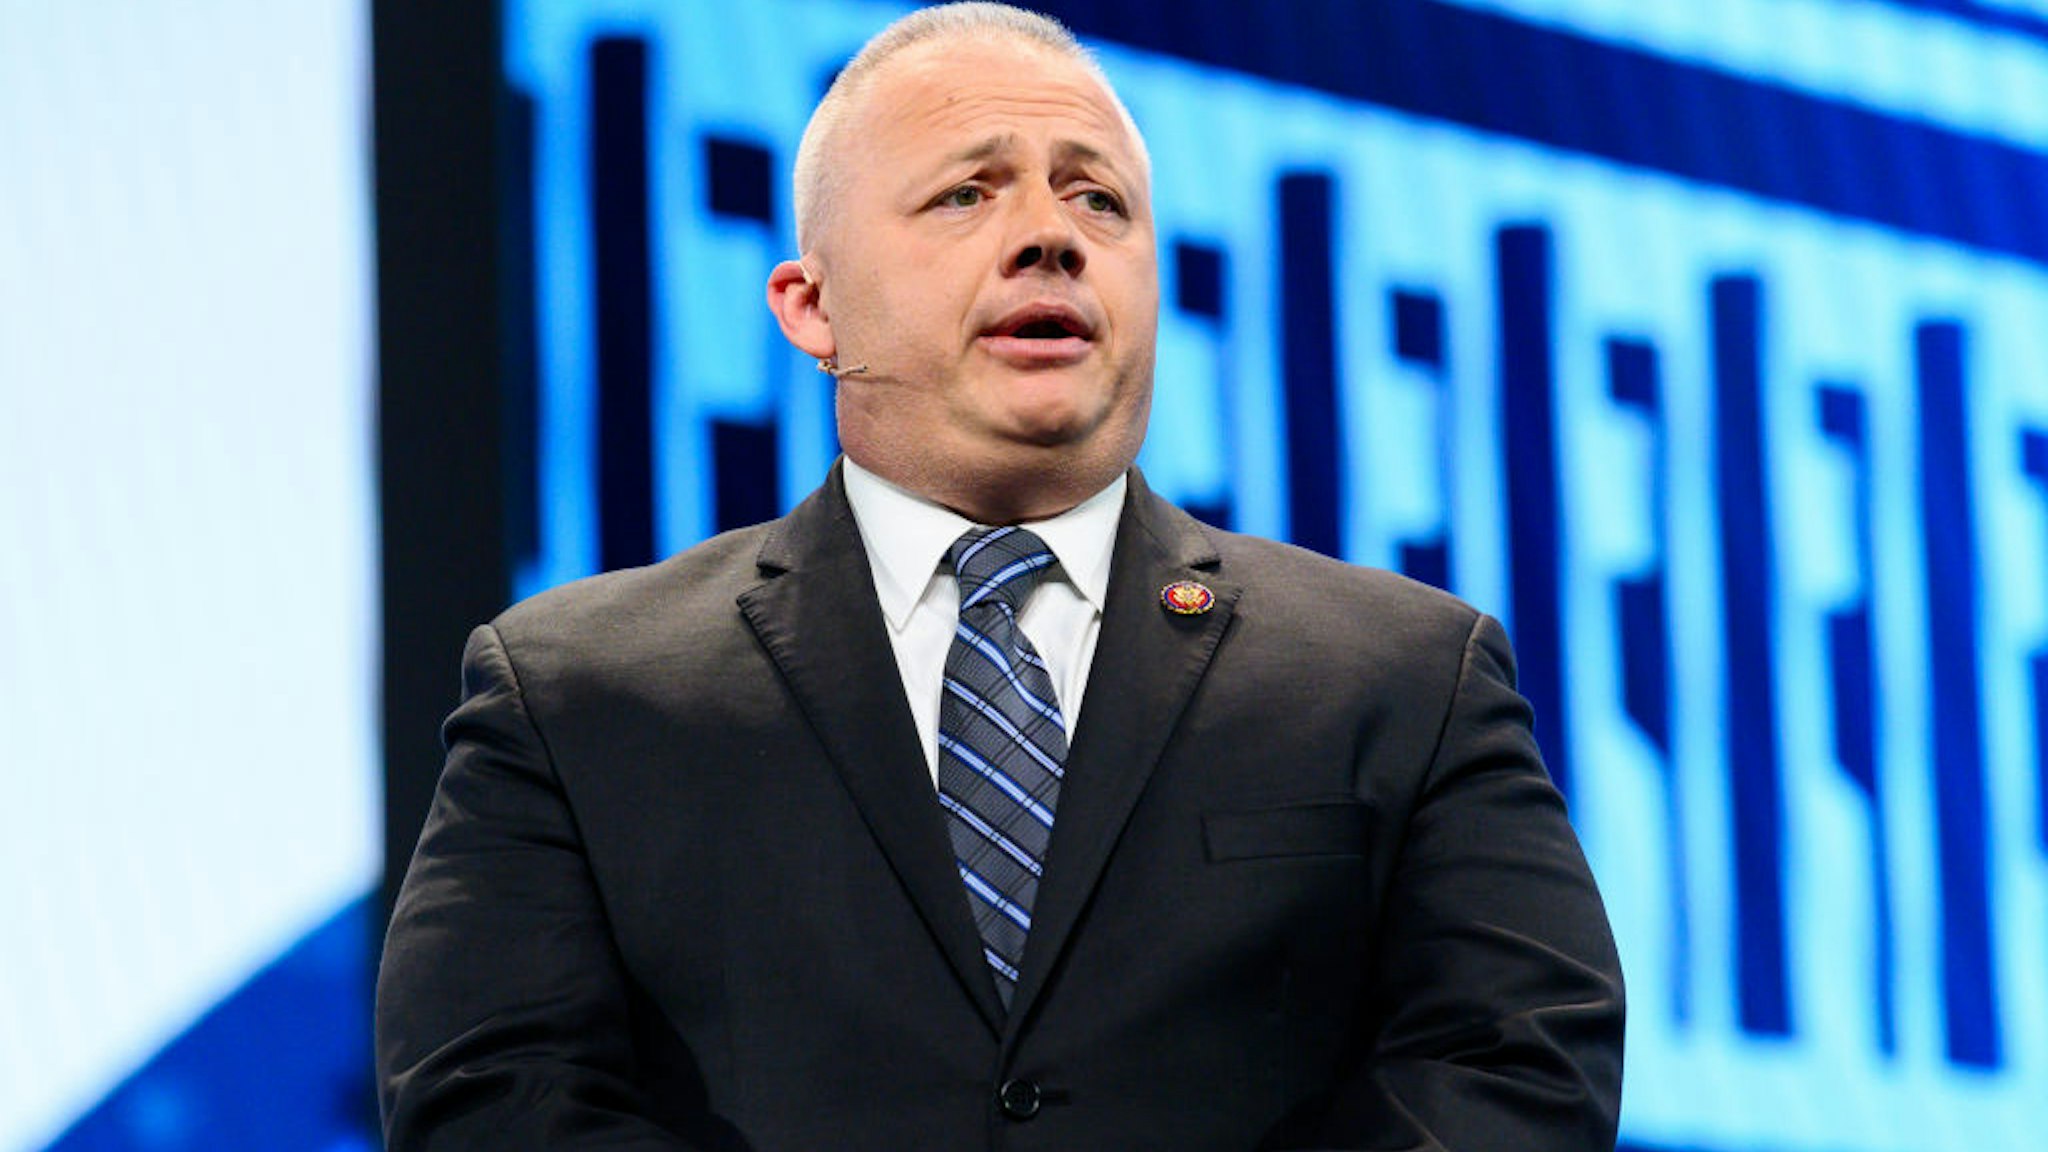 WASHINGTON, DC, UNITED STATES - 2019/03/26: U.S. Representative Denver Riggleman (R-VA) seen speaking during the American Israel Public Affairs Committee (AIPAC) Policy Conference in Washington, DC.